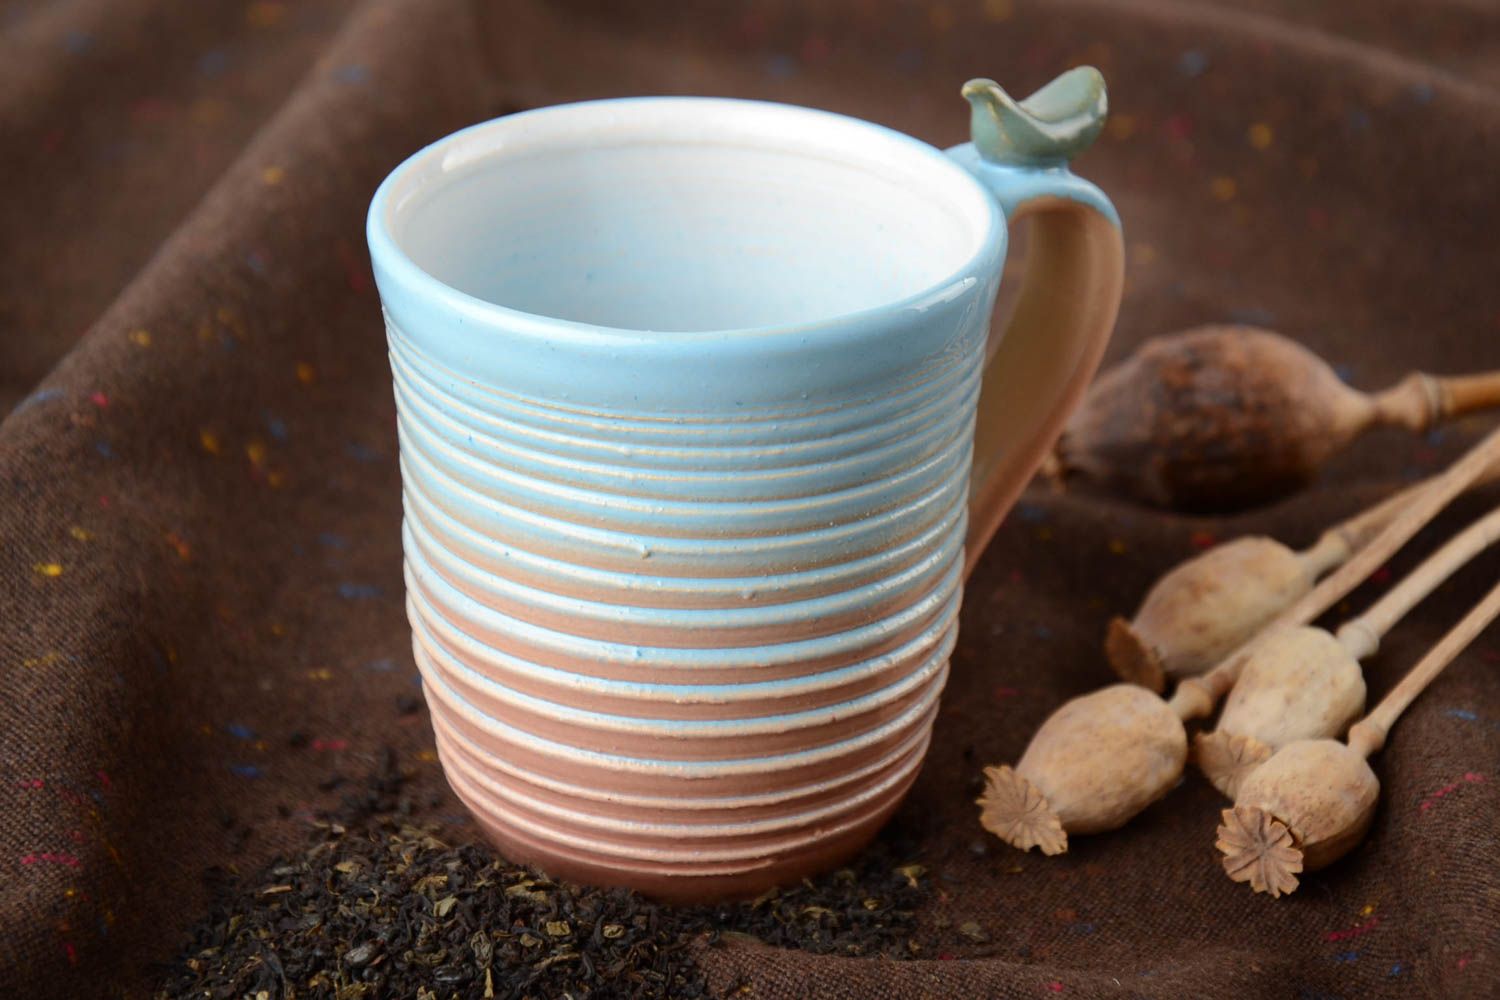 10 oz porcelain handmade drinking cup in blue, white, and beige colors with handle photo 1